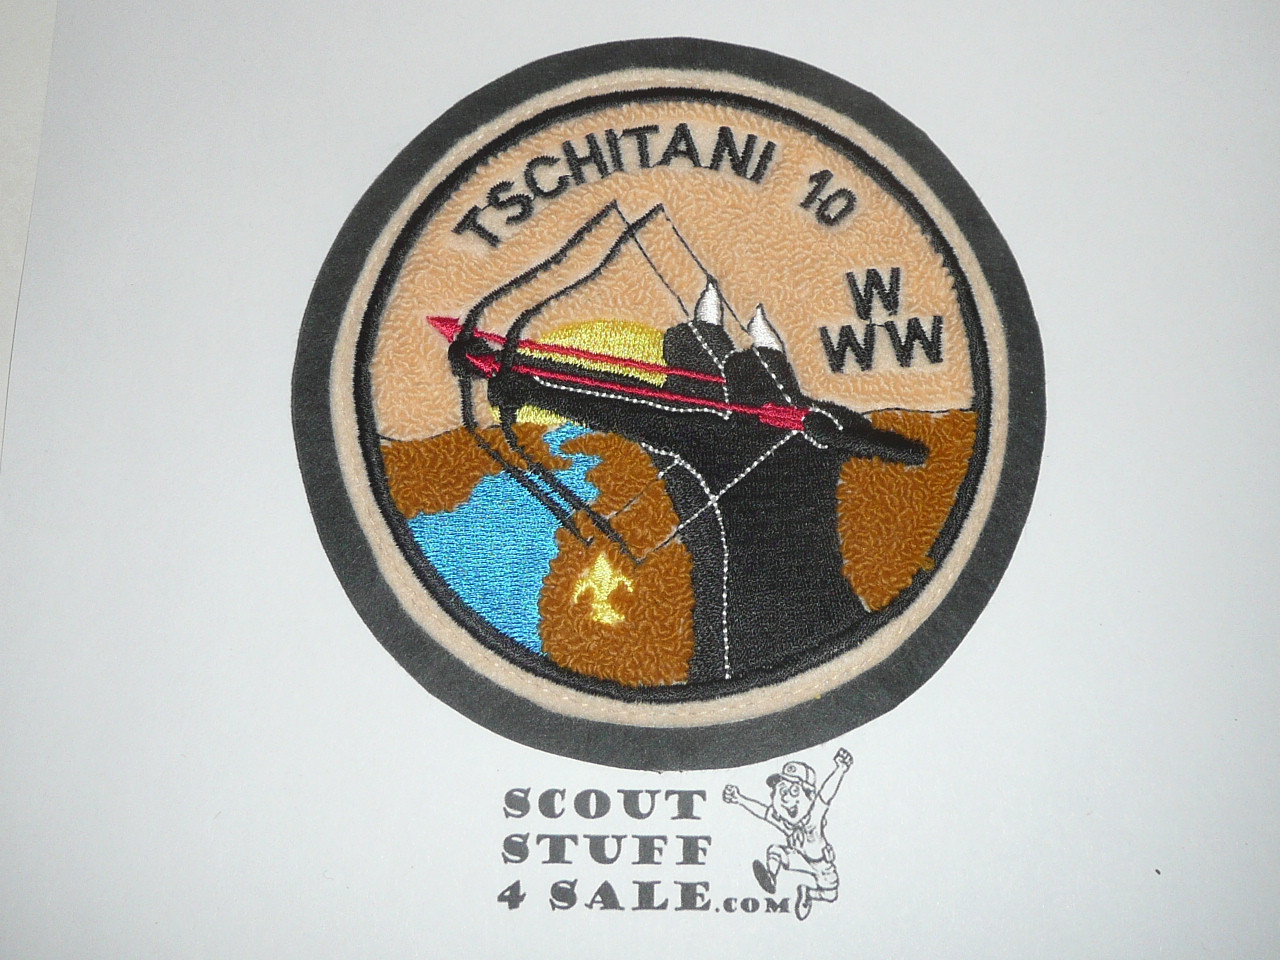 Order of the Arrow Lodge #10 Tschitani c2 Chenille Patch